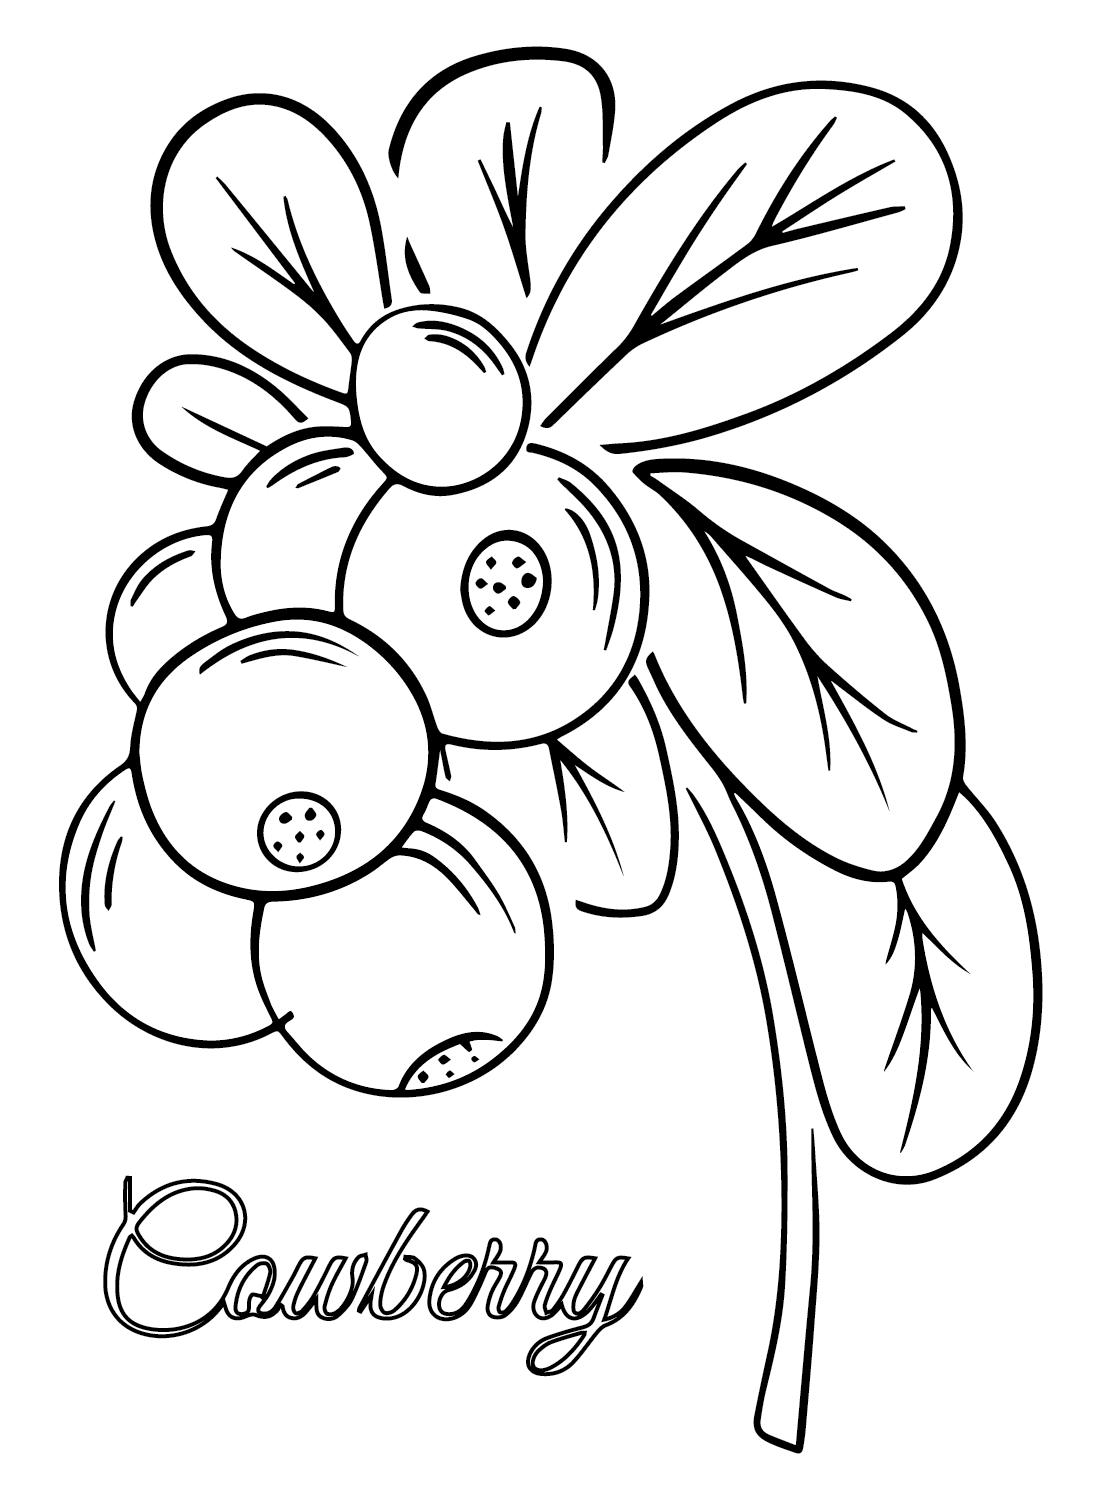 Cranberry coloring pages printable for free download